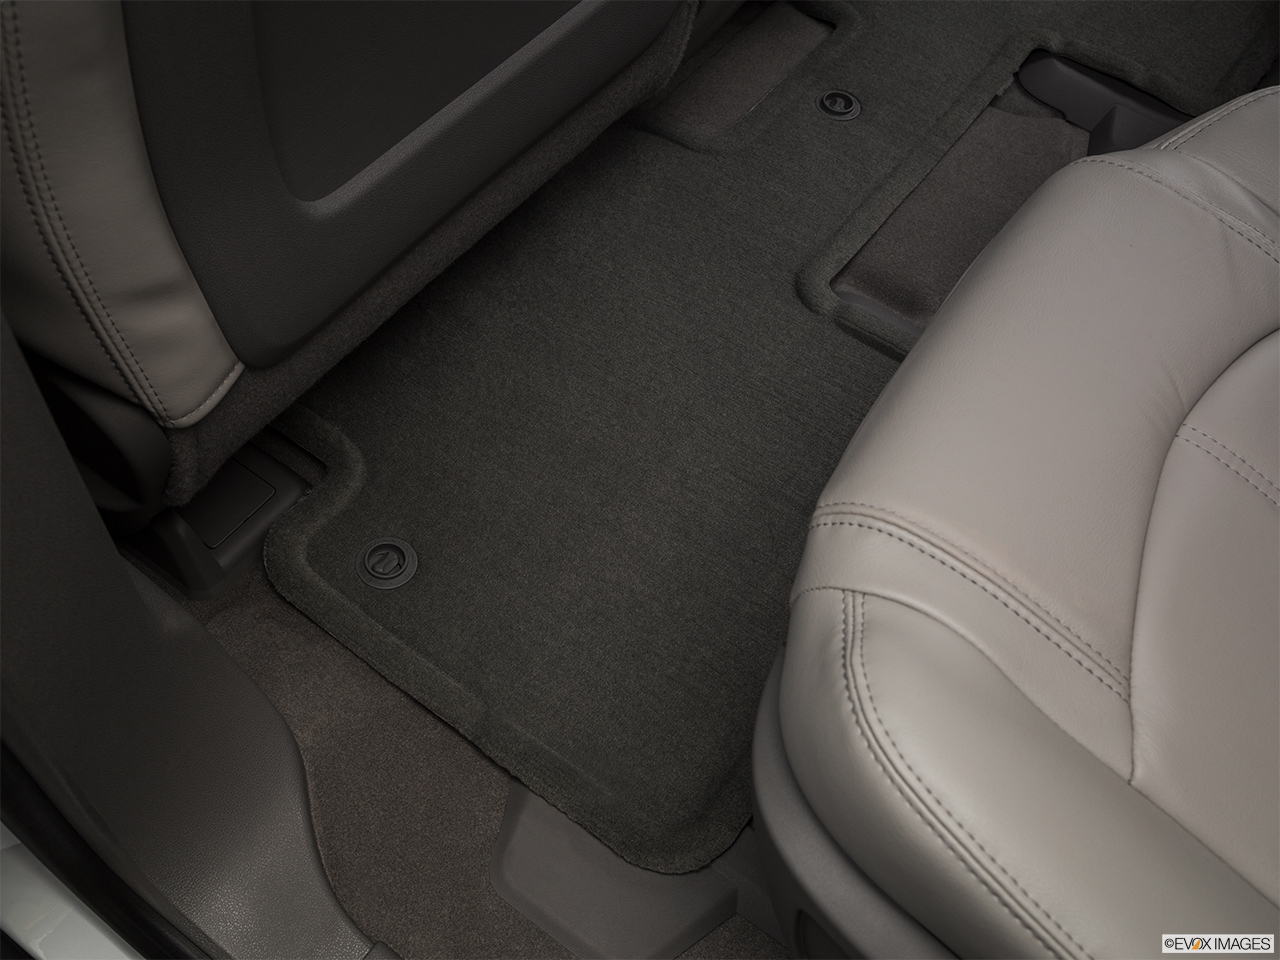 2017 GMC Acadia Limited SLT Rear driver's side floor mat. Mid-seat level from outside looking in. 